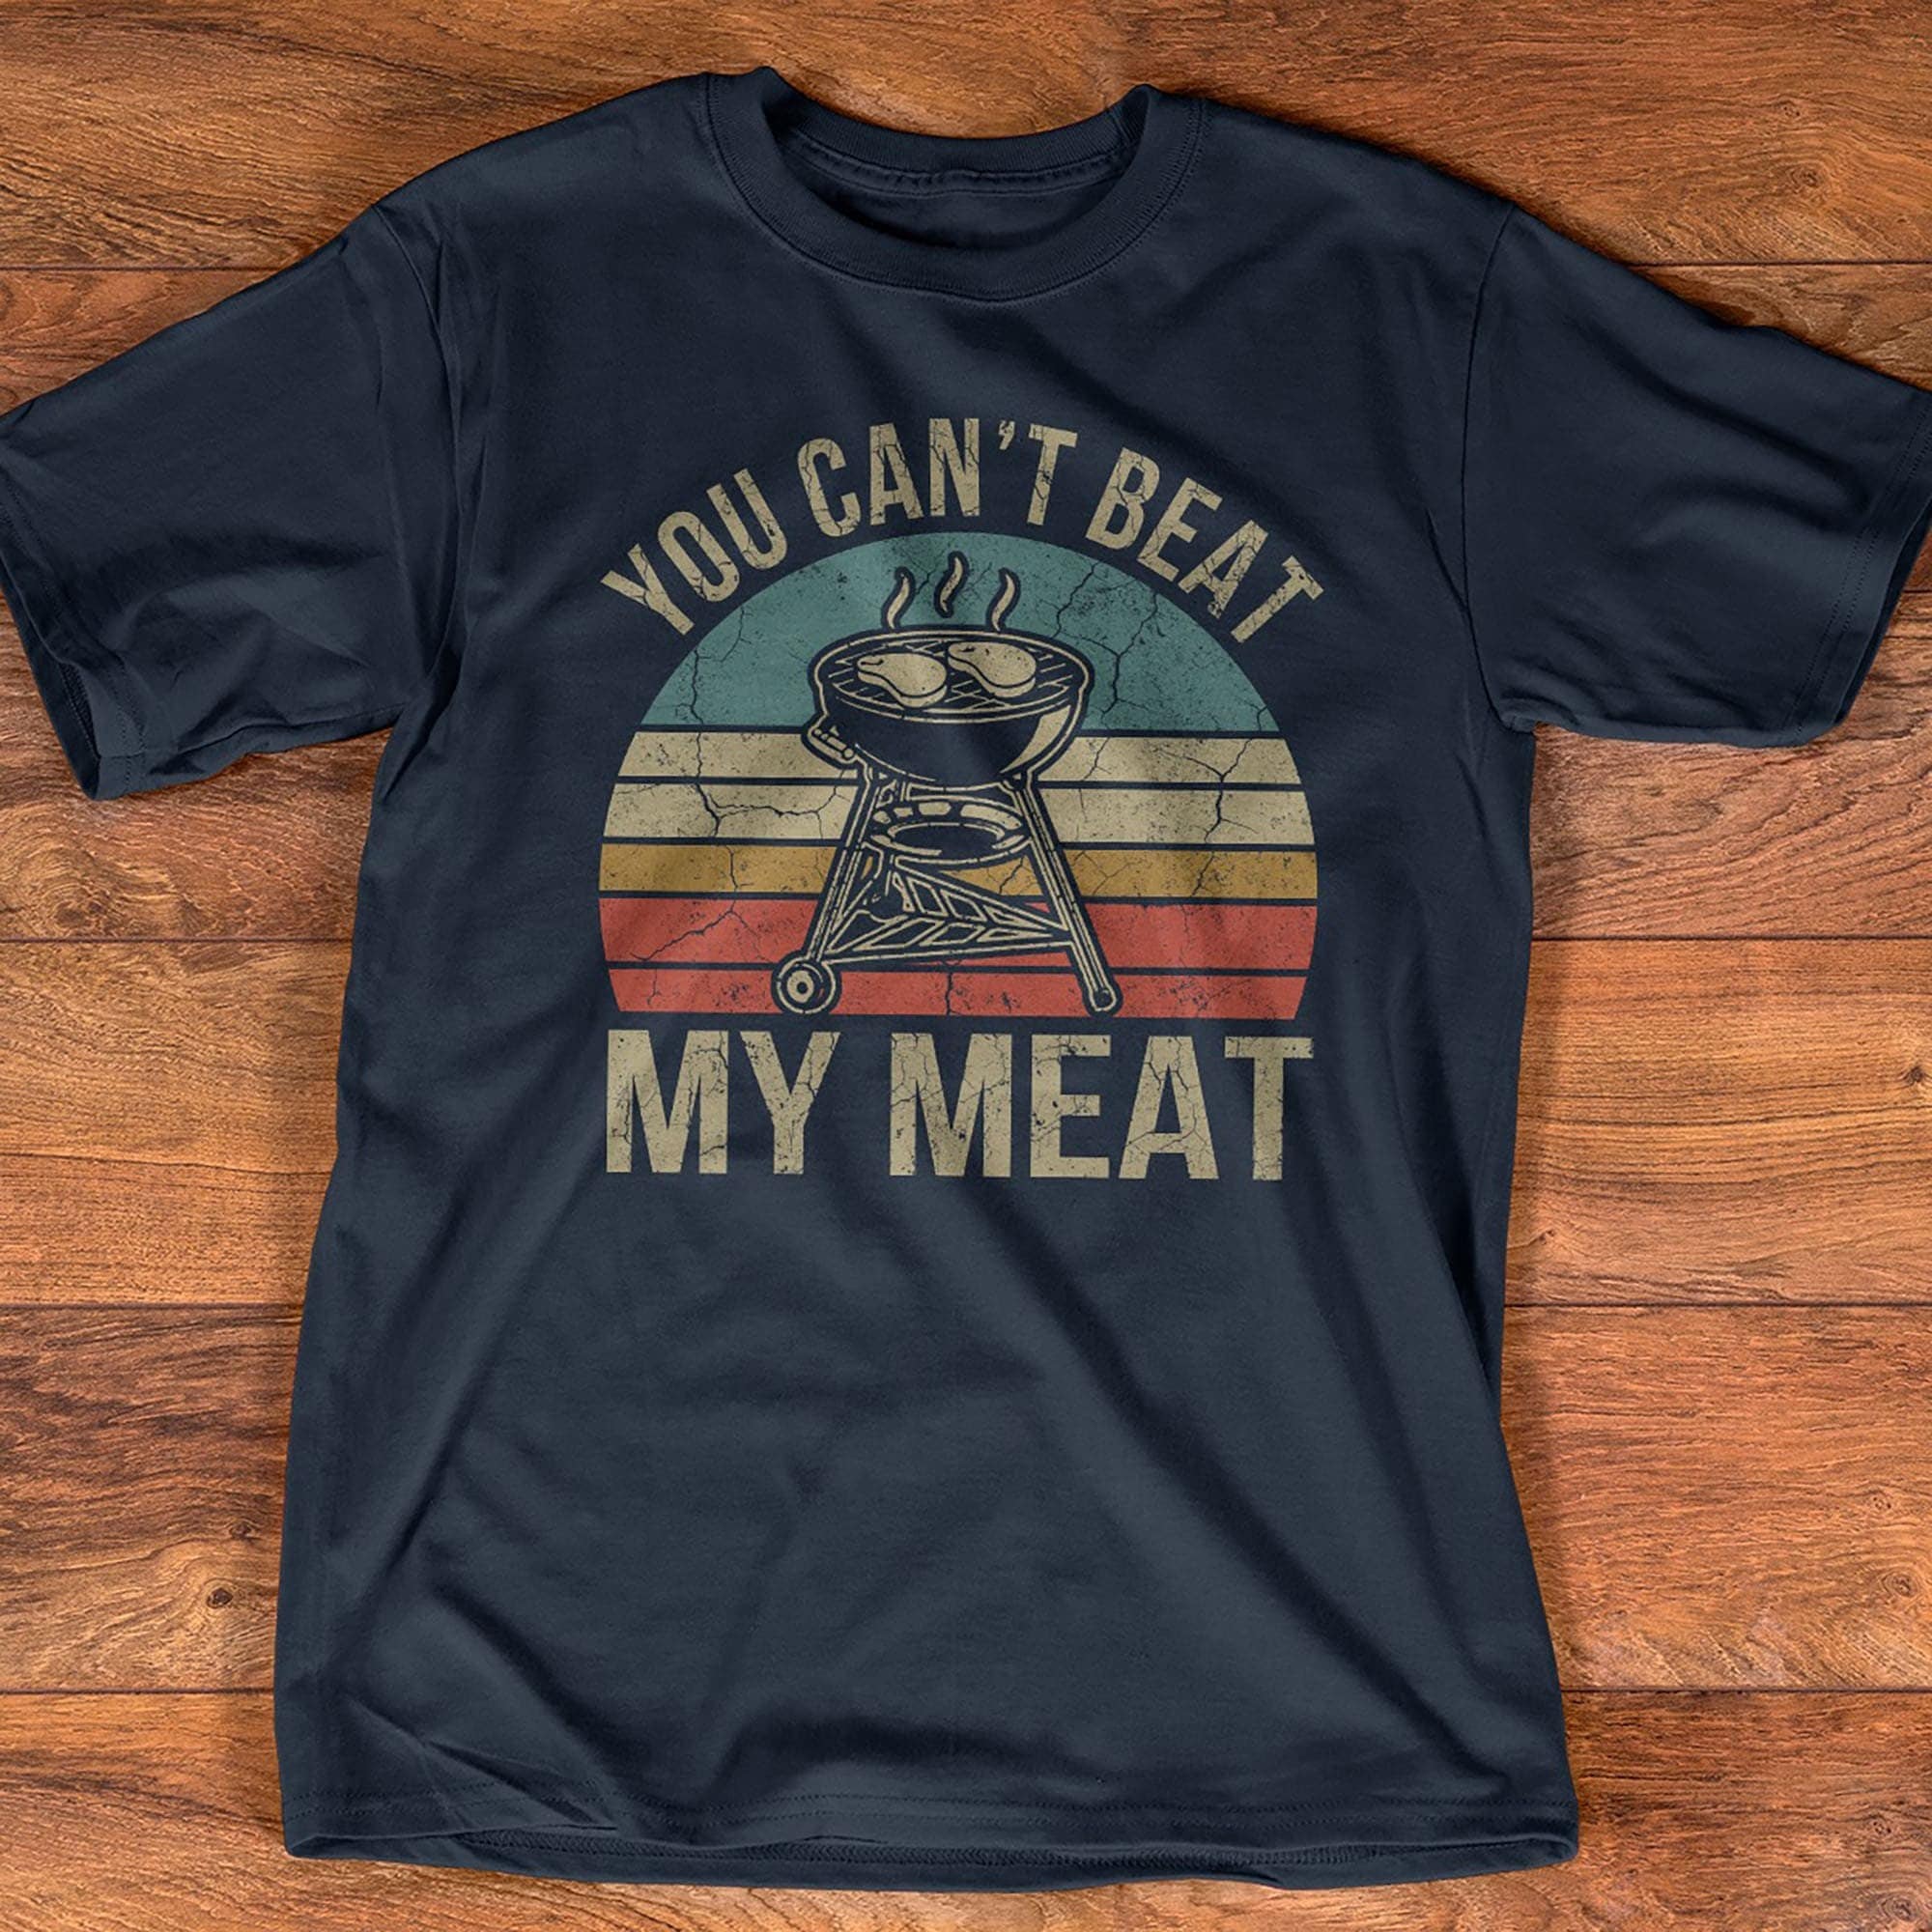 You Can't Beat My Meat Shirt Funny Vintage BBQ Grilling | Etsy